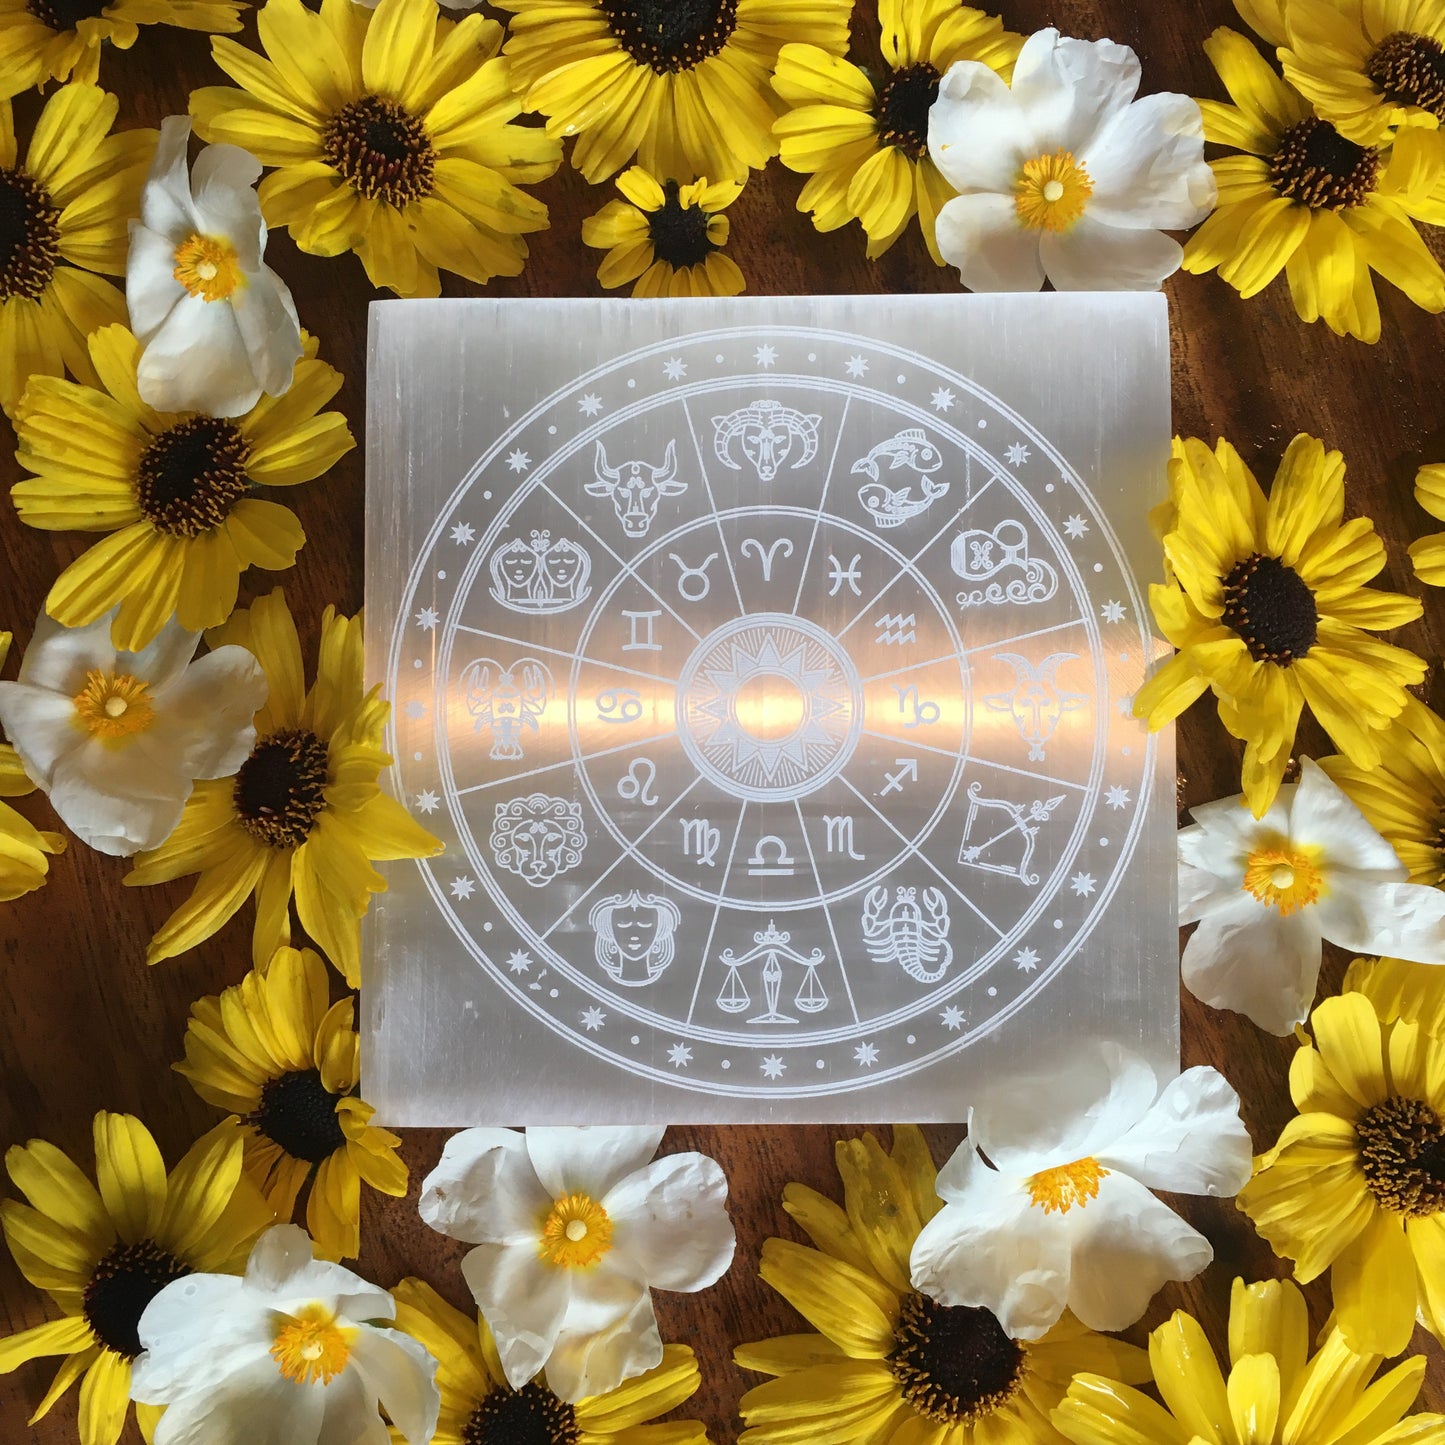 *CLEARANCE* 2ND QUALITY OR DAMAGED “Zodiac Wheel” Horoscope Selenite Cleansing Disc, Charging Plate and Crystal Grid - Fractalista Designs